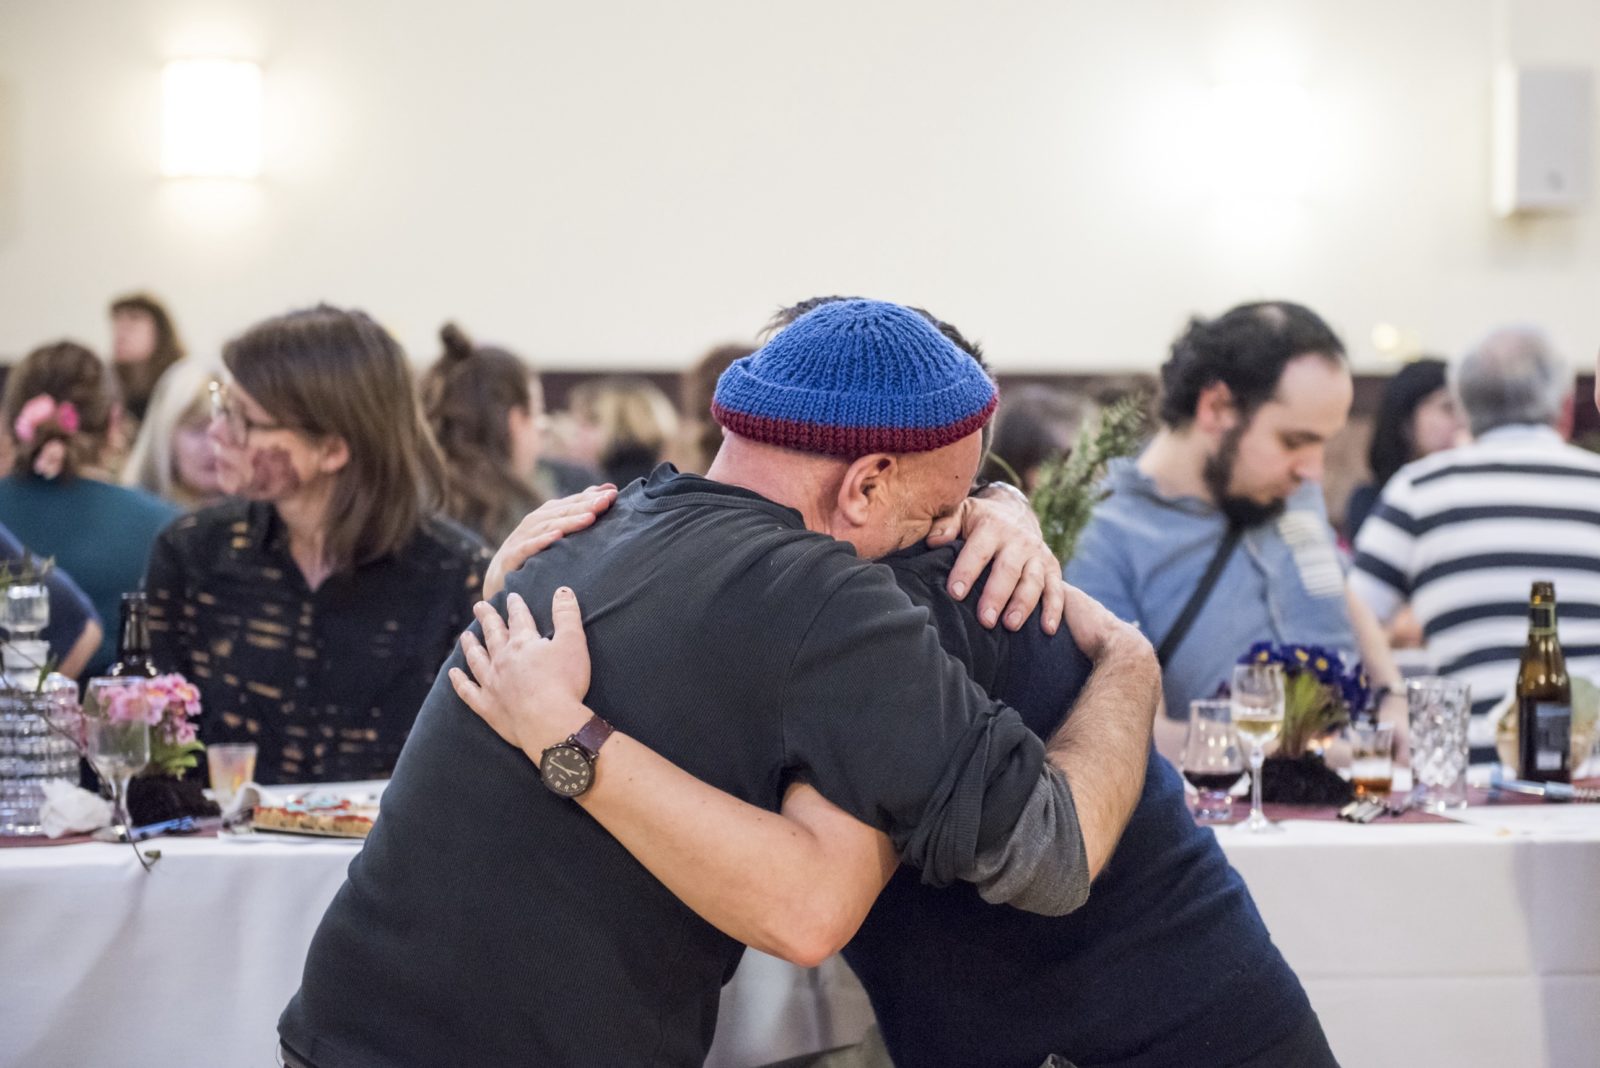 Two people sitting at a table hug intensely. One wears a blue hat and buries their head in the shoulder of the other. Behind them the room is full of people sitting at long tables.